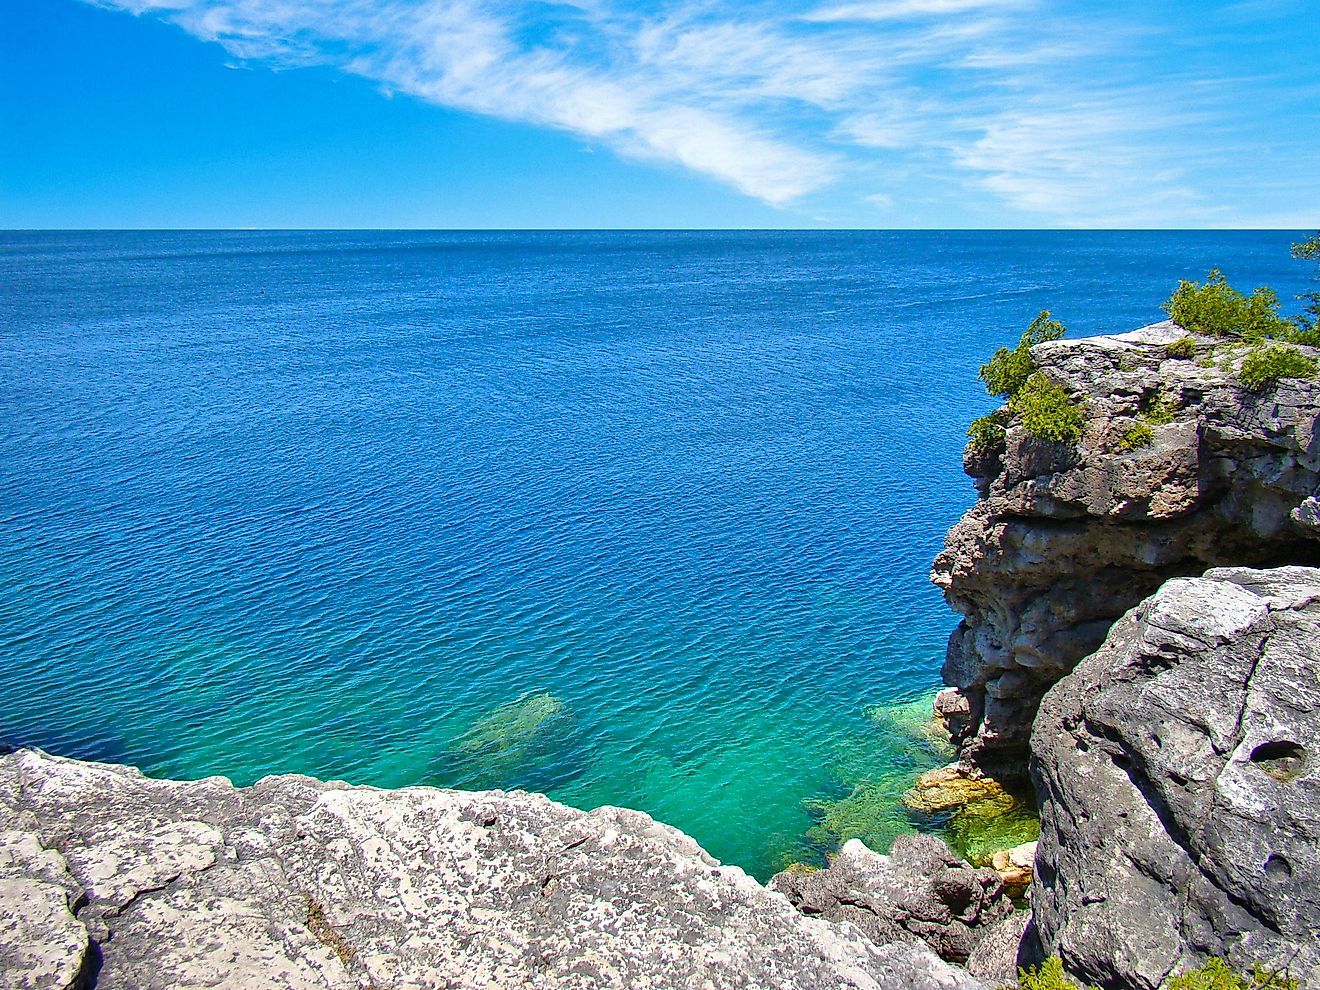 Lake Huron is the second largest lake in North America, and the third largest body of water.